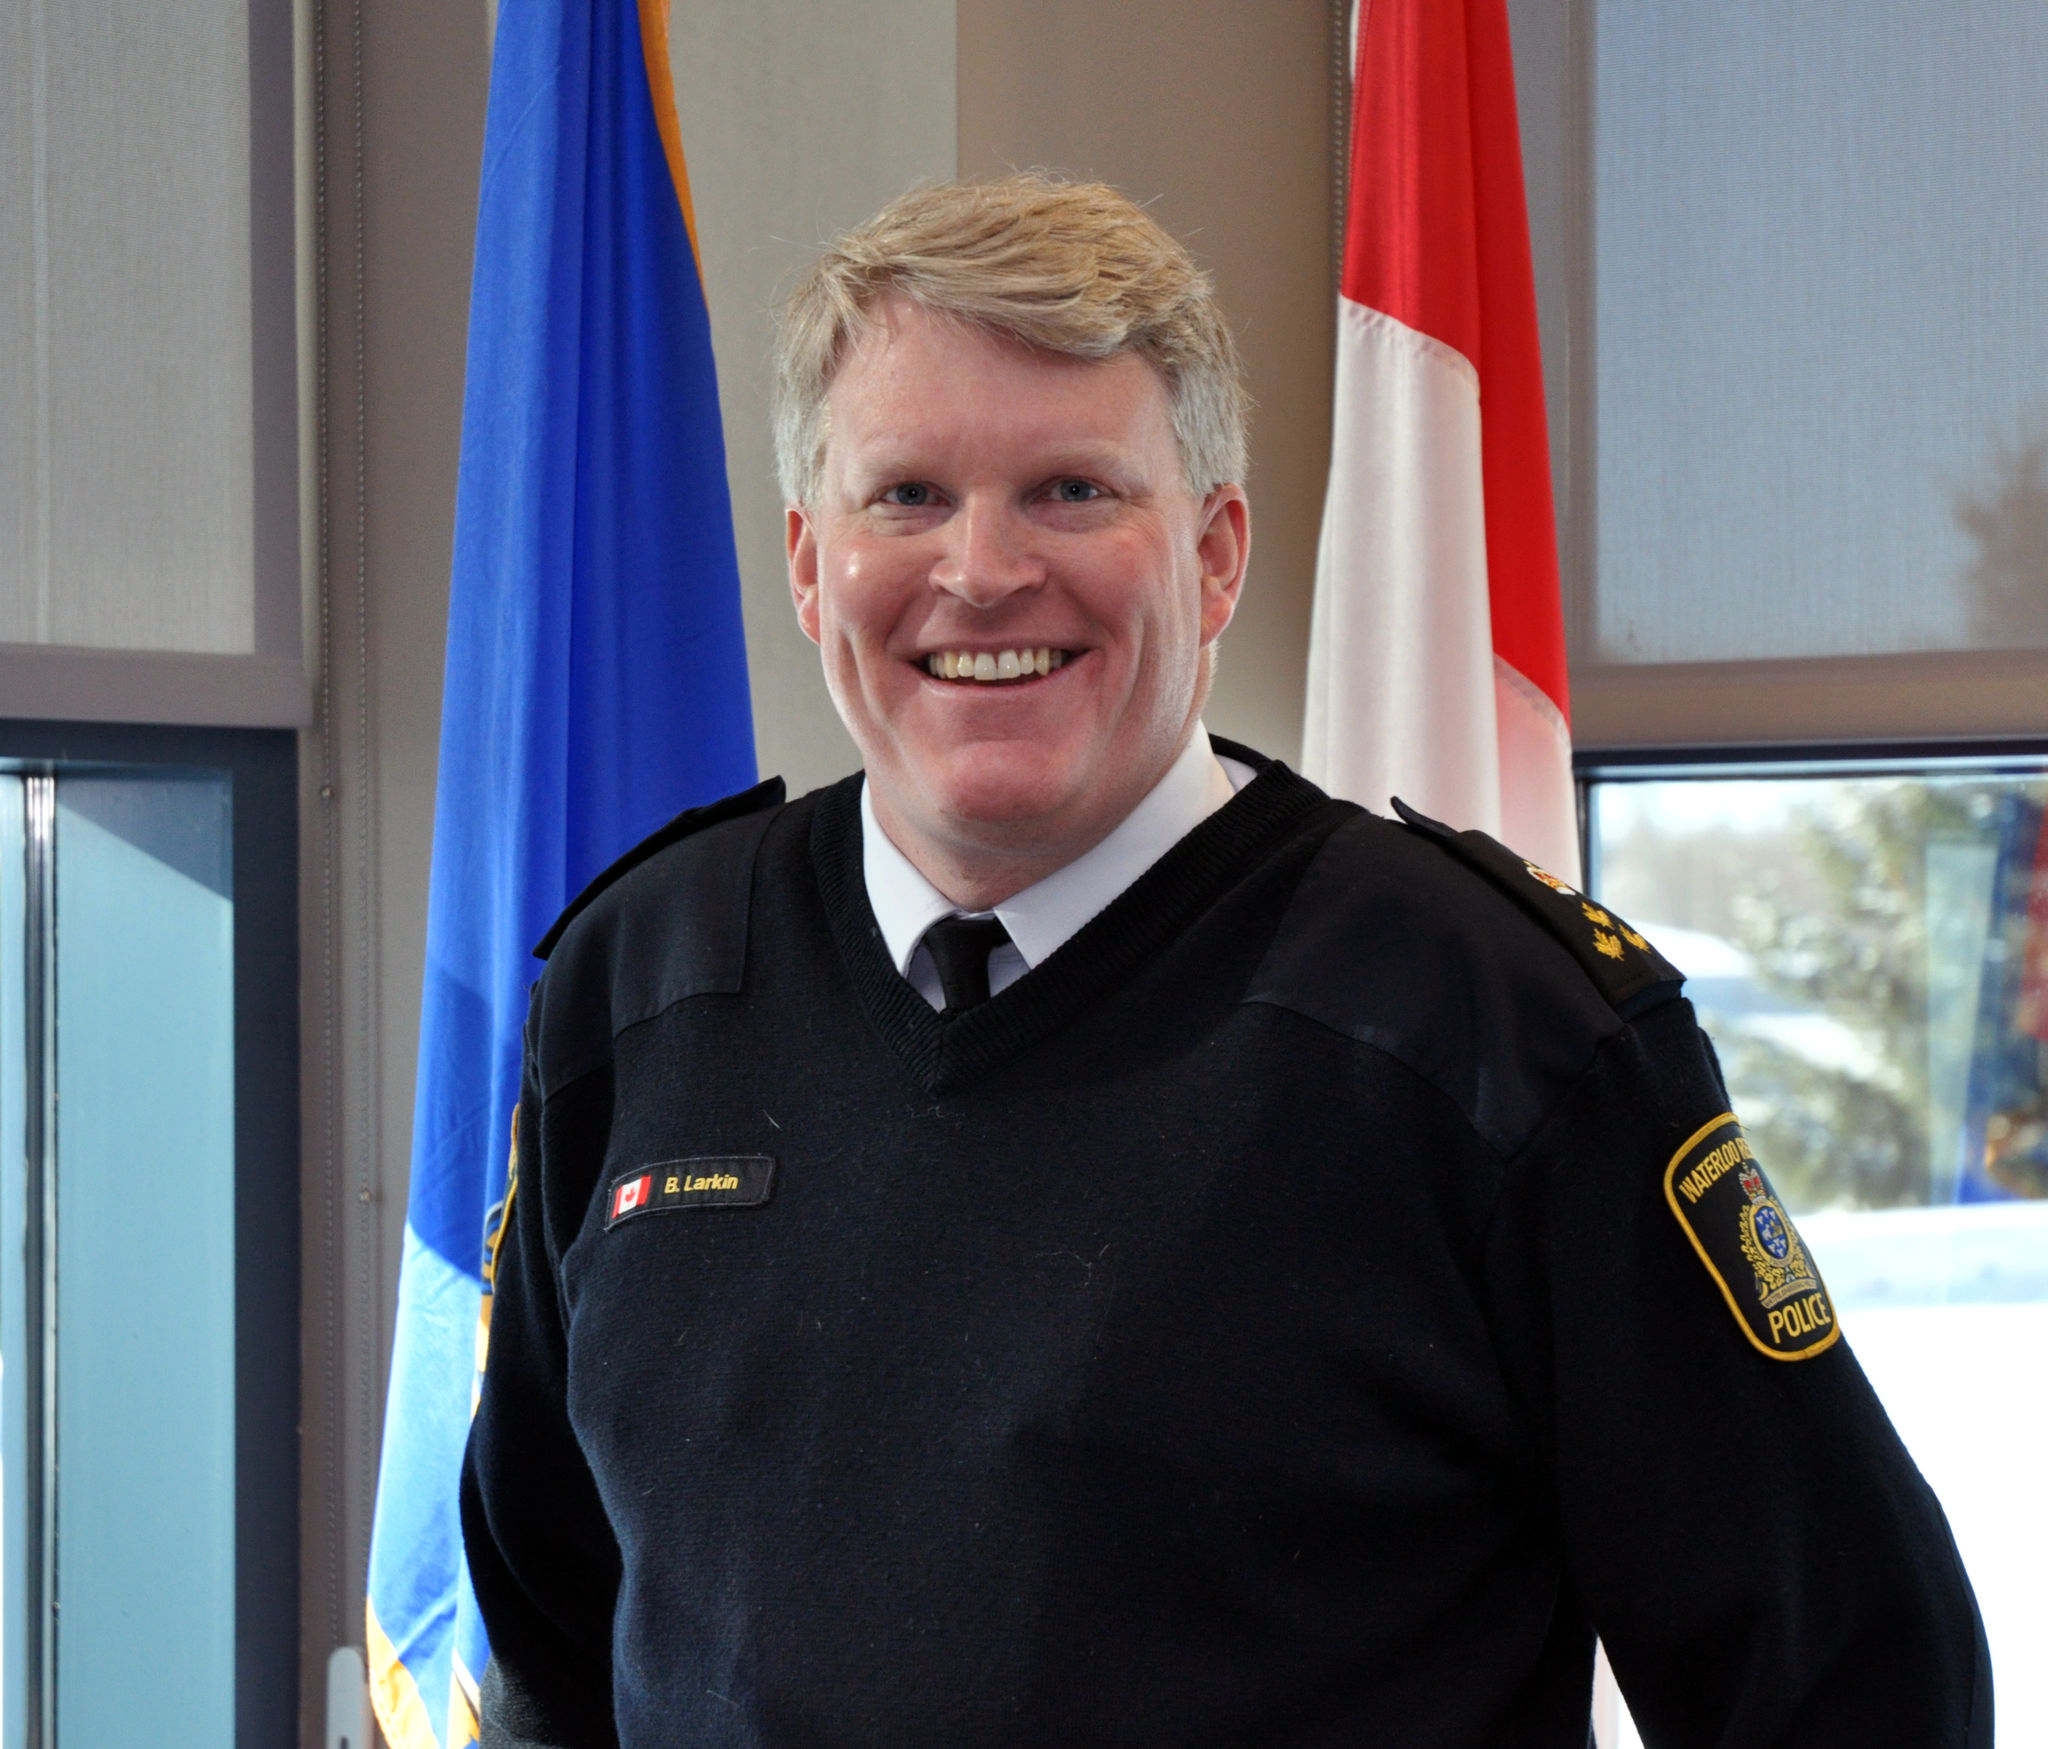 One Act – WRPS Chief Bryan Larkin